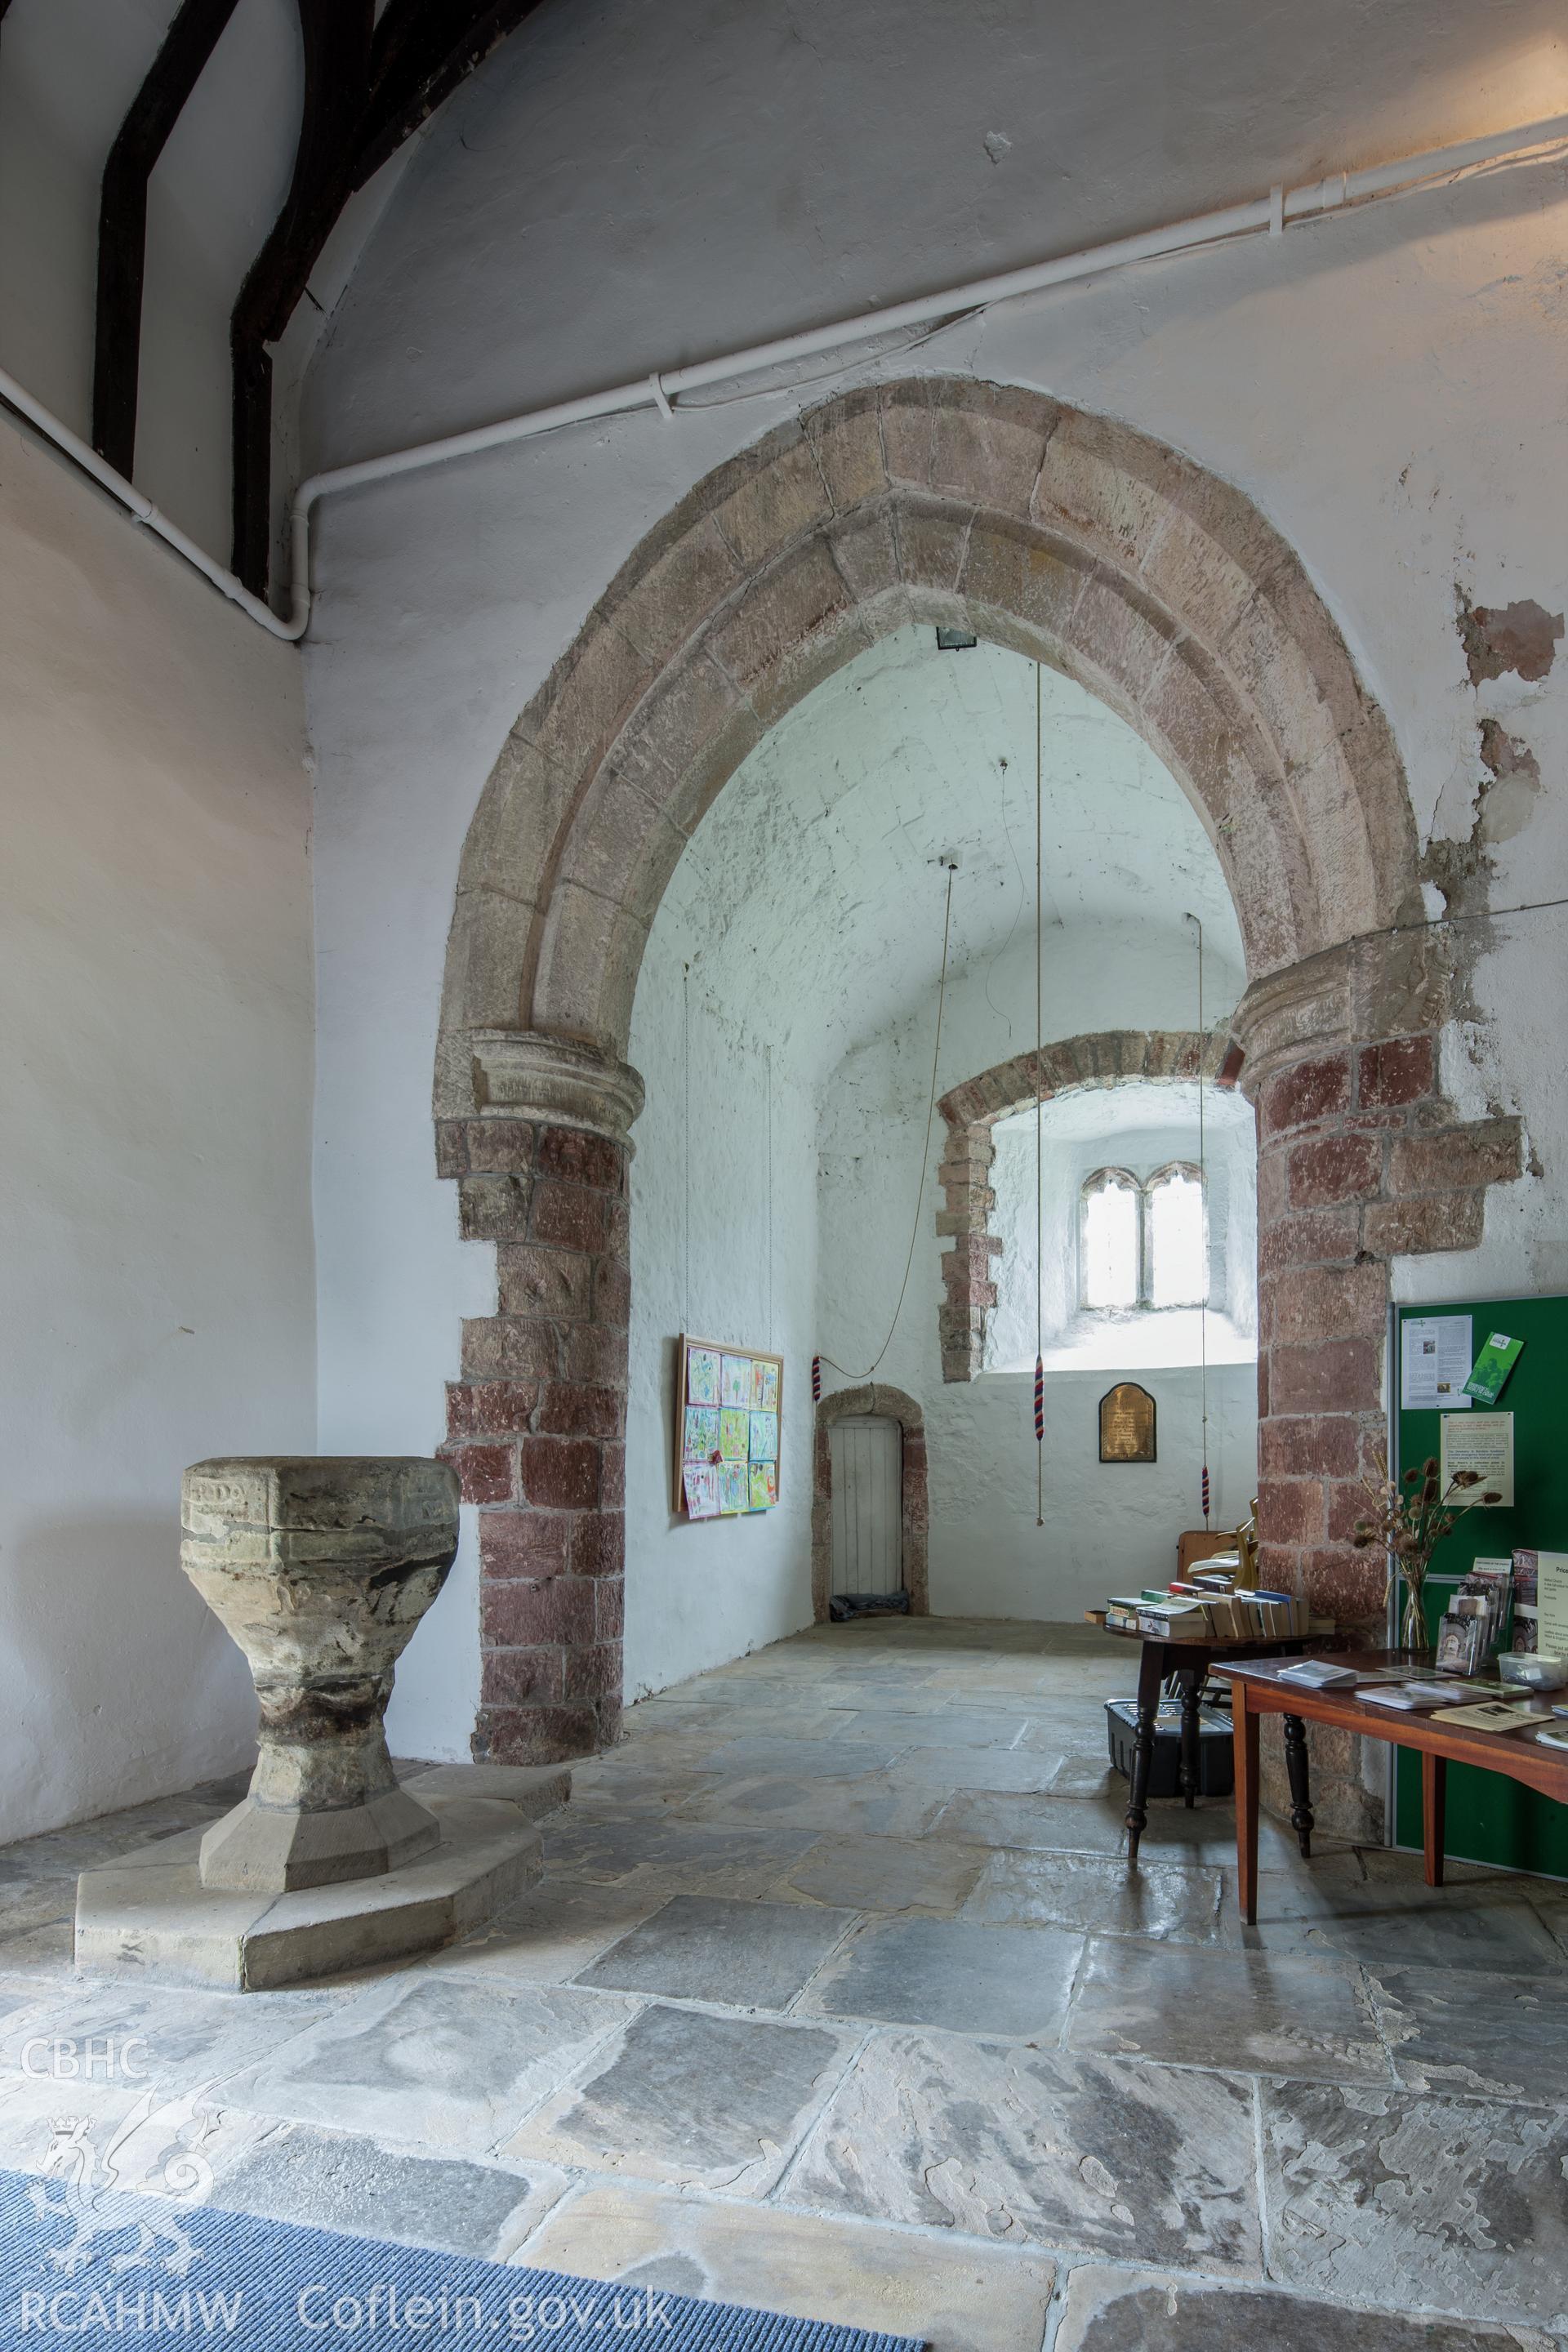 Interior view, base of tower and font.